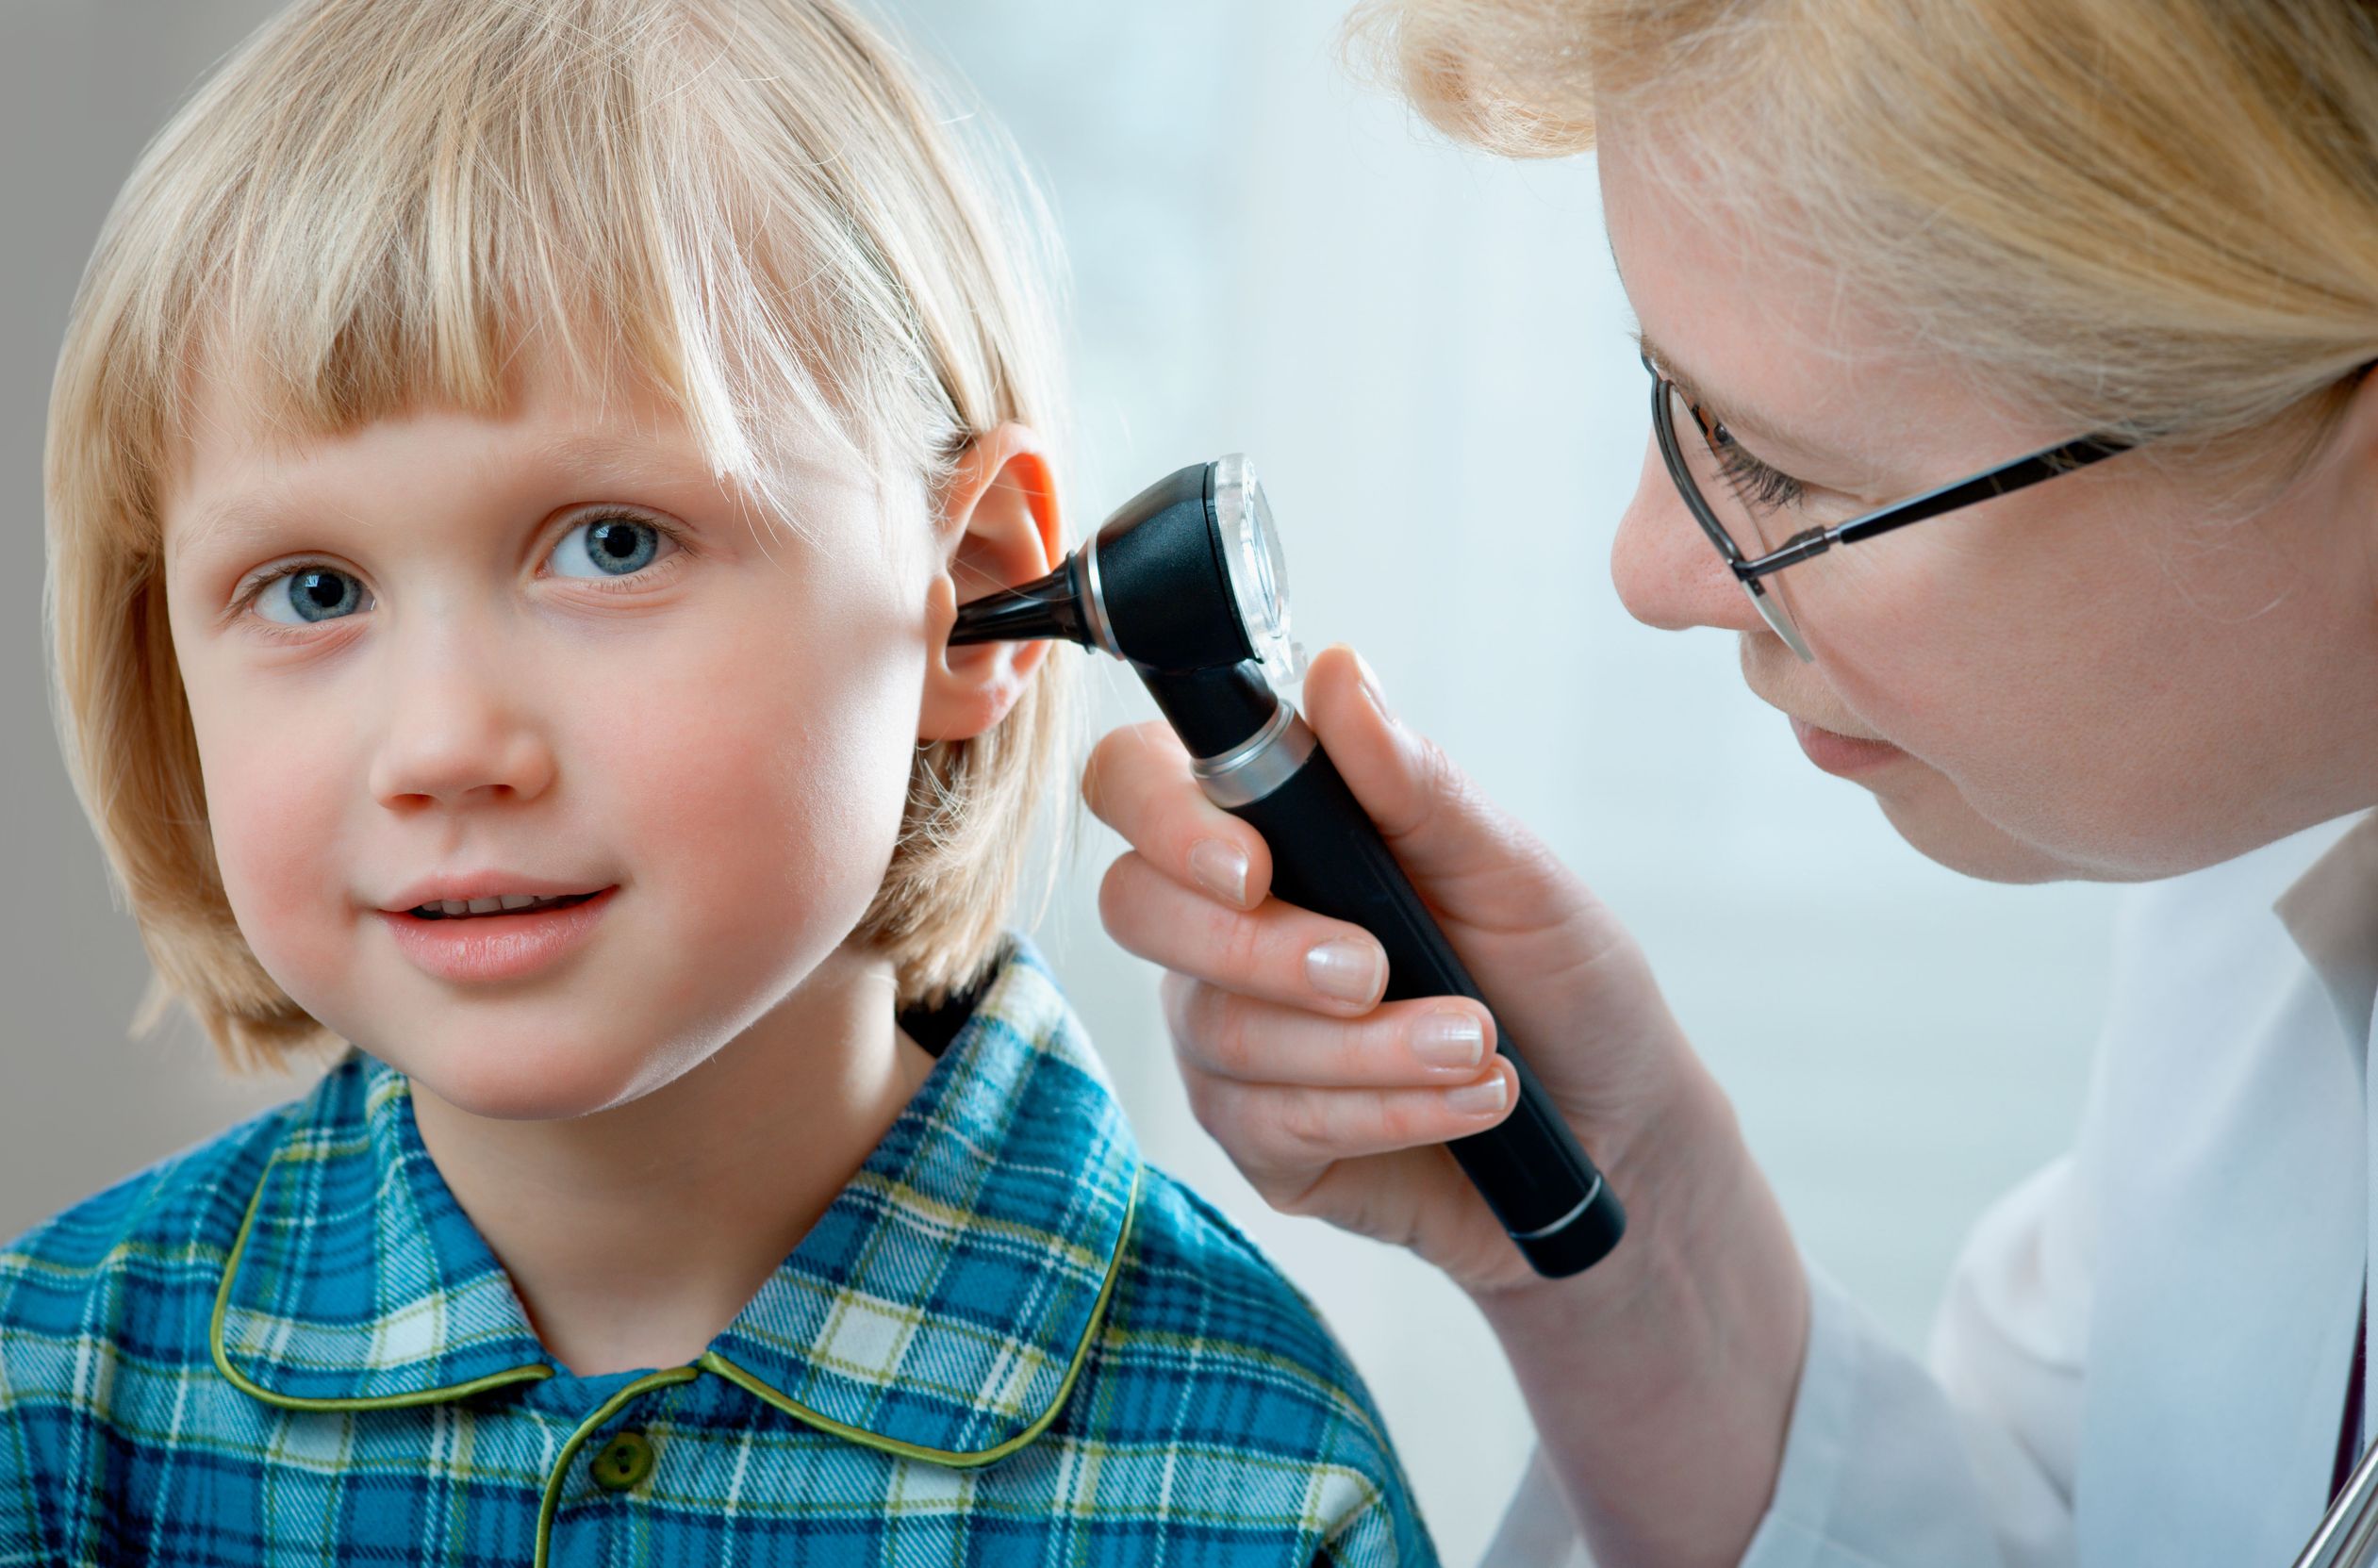 Are You Having Problems with Your Hearing in Houston, TX?